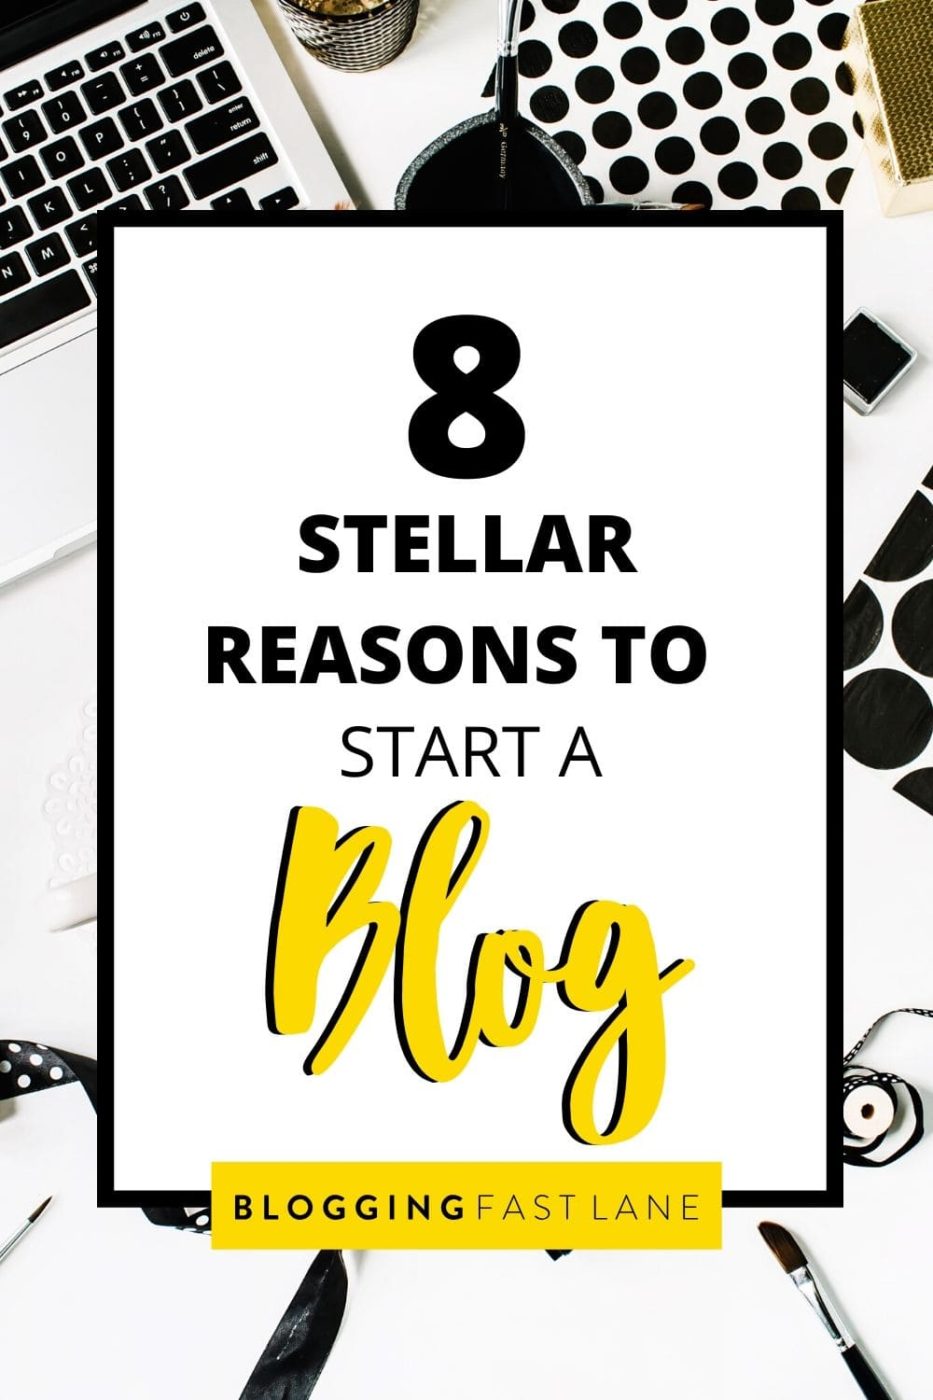 Should I Start a Blog | If you're wondering "should I start a blog?" you're in the right place. Check out these 8 awesome reasons to start a blog in 2020!